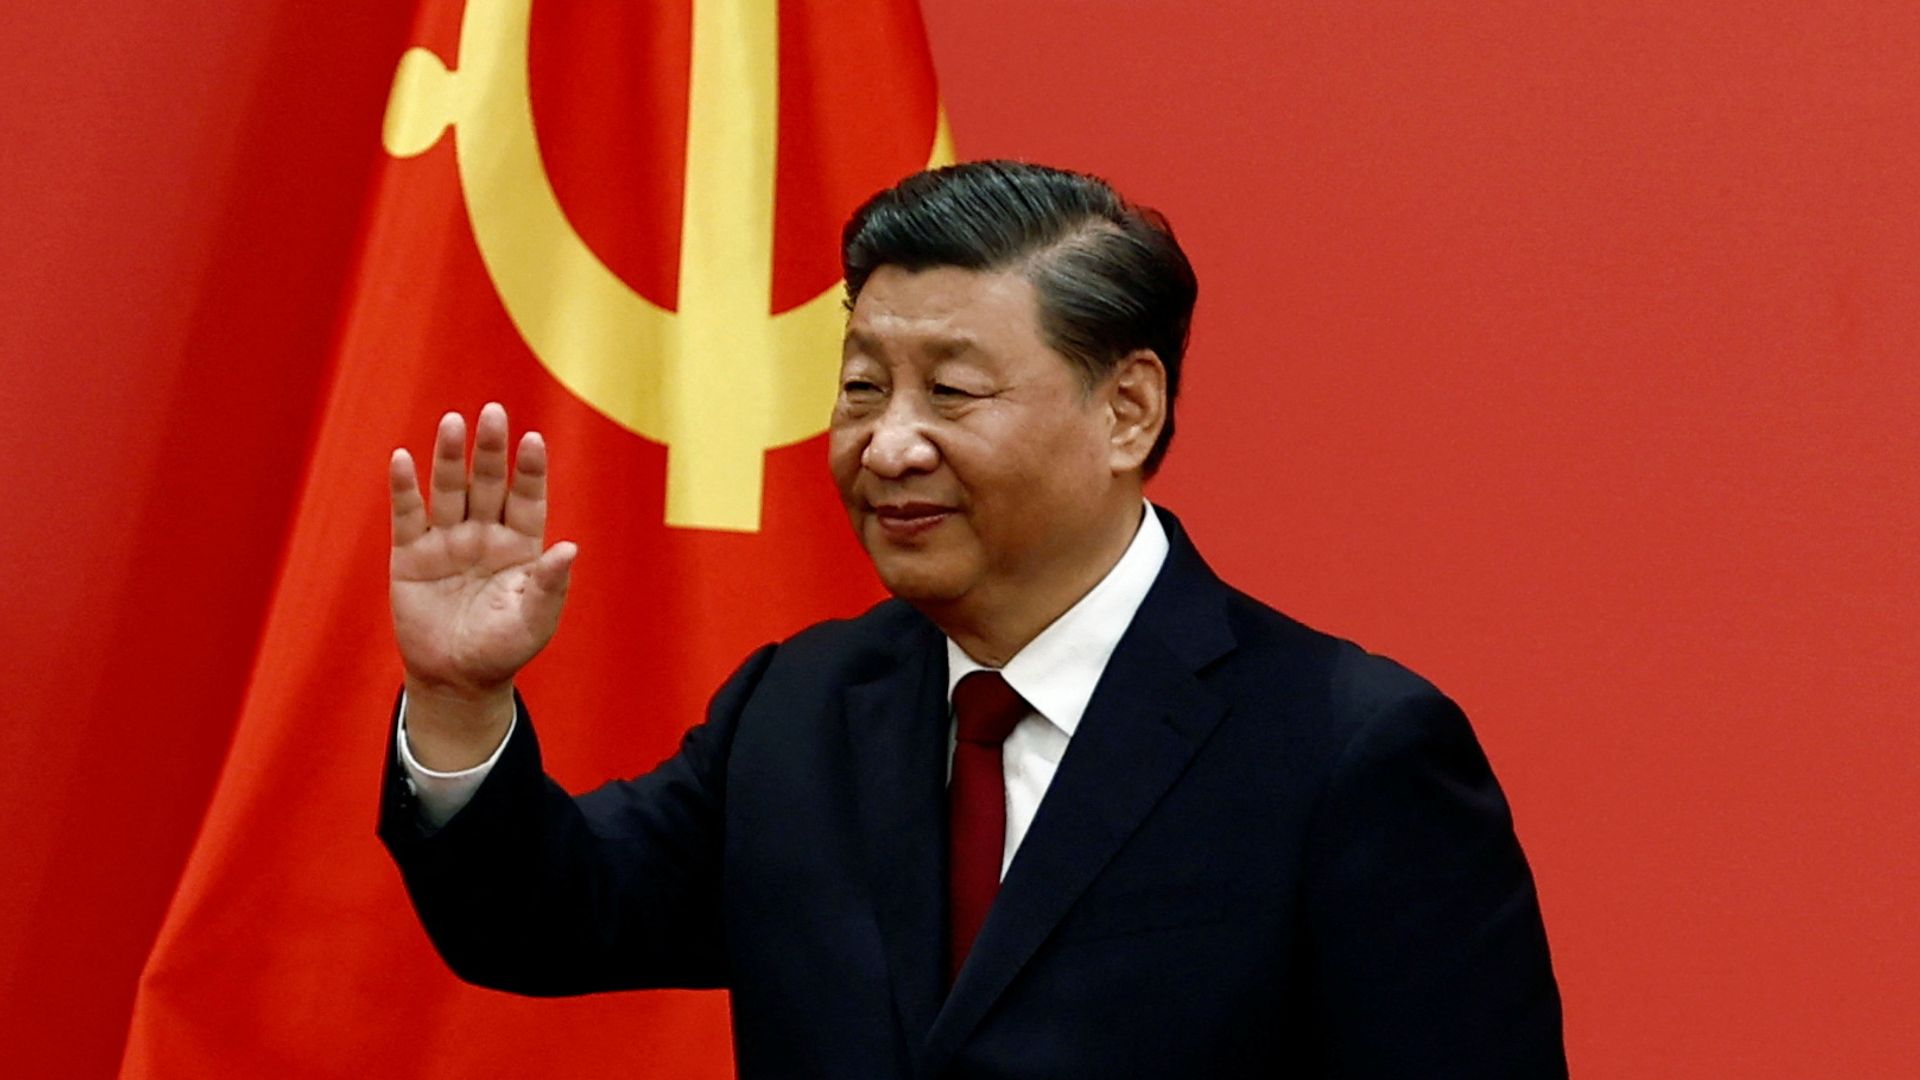 China's Xi Jinping is trying to broker peace between Russia and Ukraine, a move that could undermine the U.S.'s standing on the global stage.